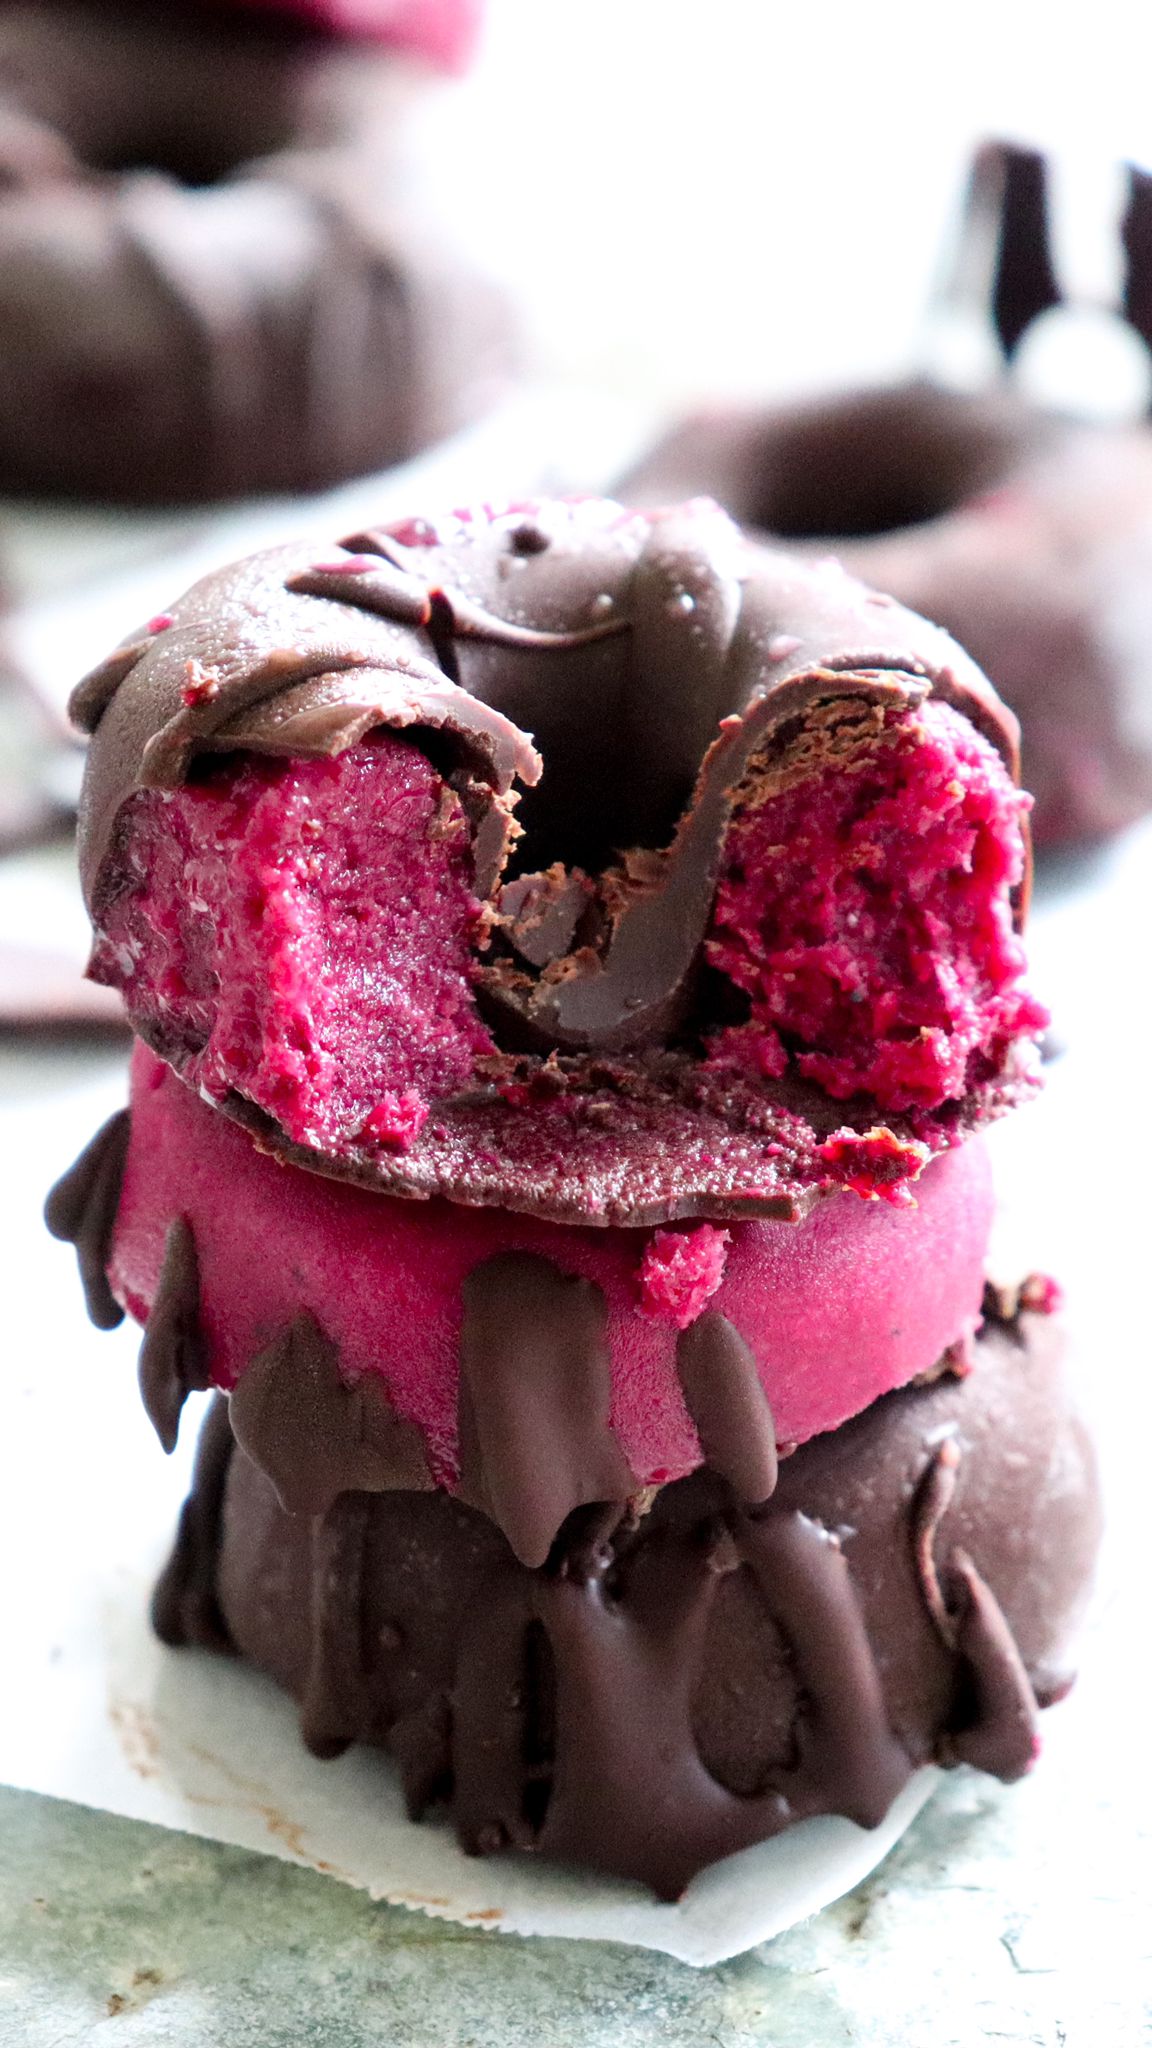 BLUEBERRY BEETROOT ICE-CREAM CHOCOLATE COATED DONUTS